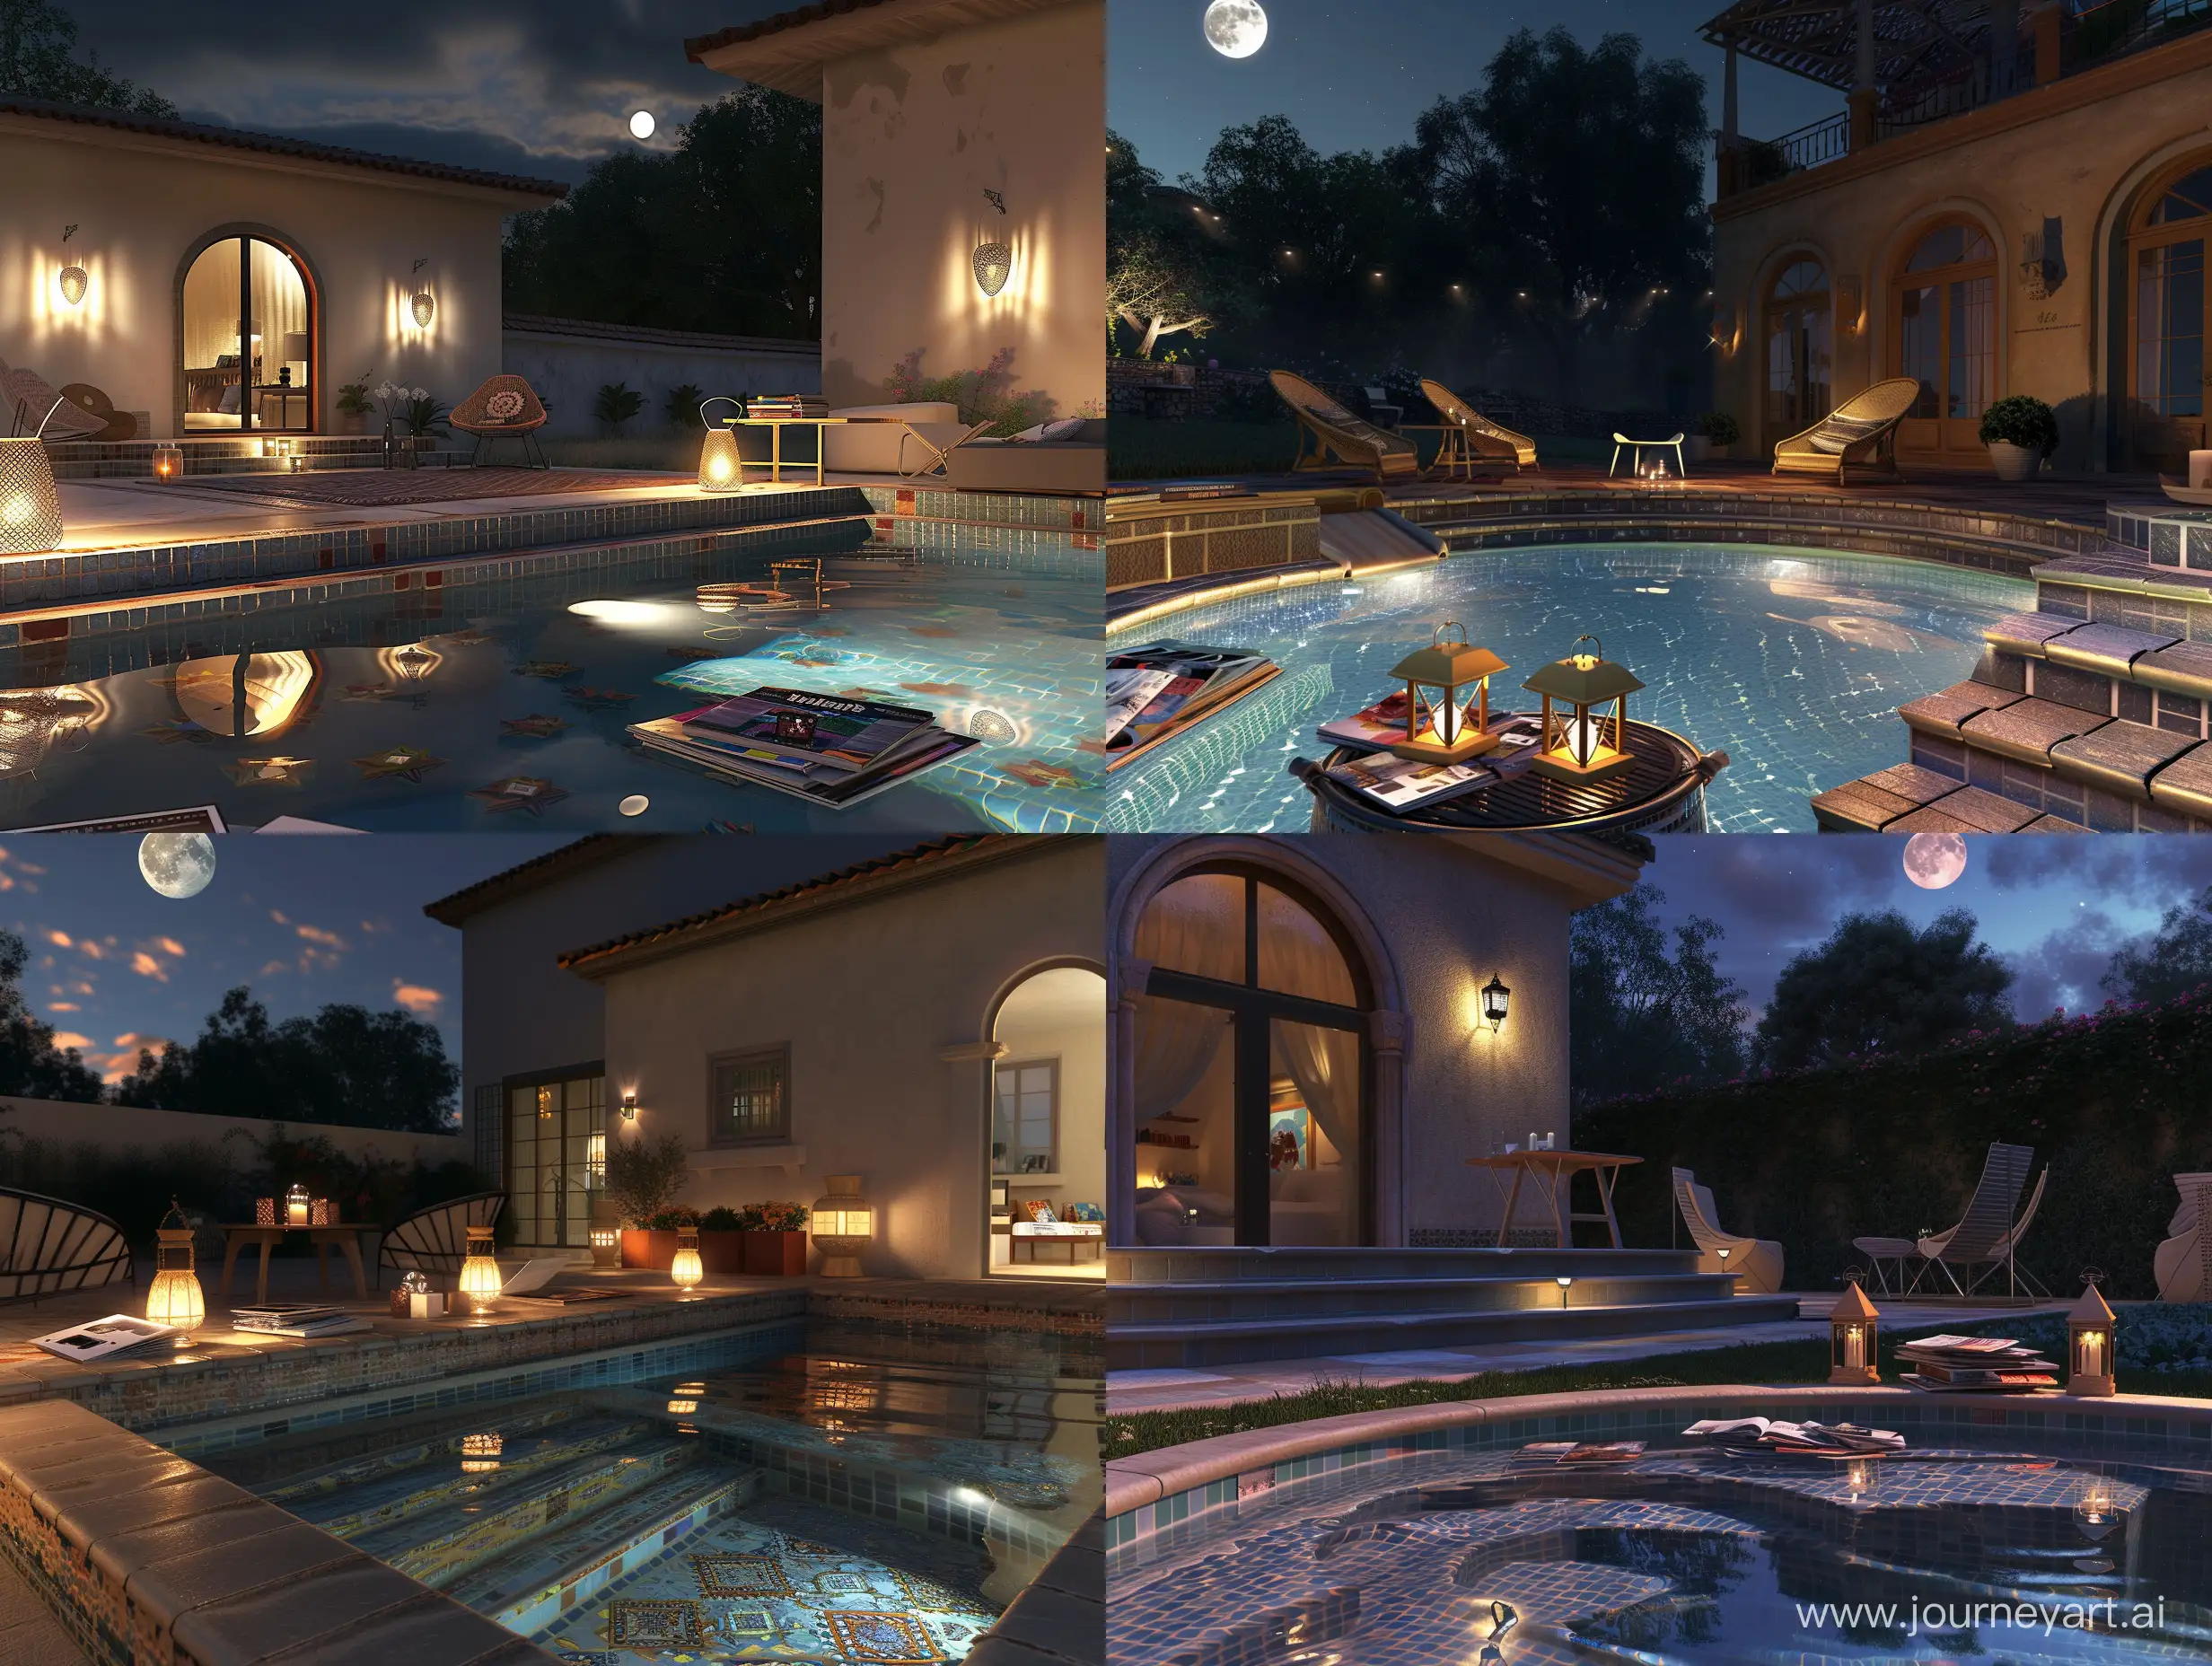 Luxurious-American-House-Night-Scene-with-Swimming-Pool-and-Elegant-Dcor